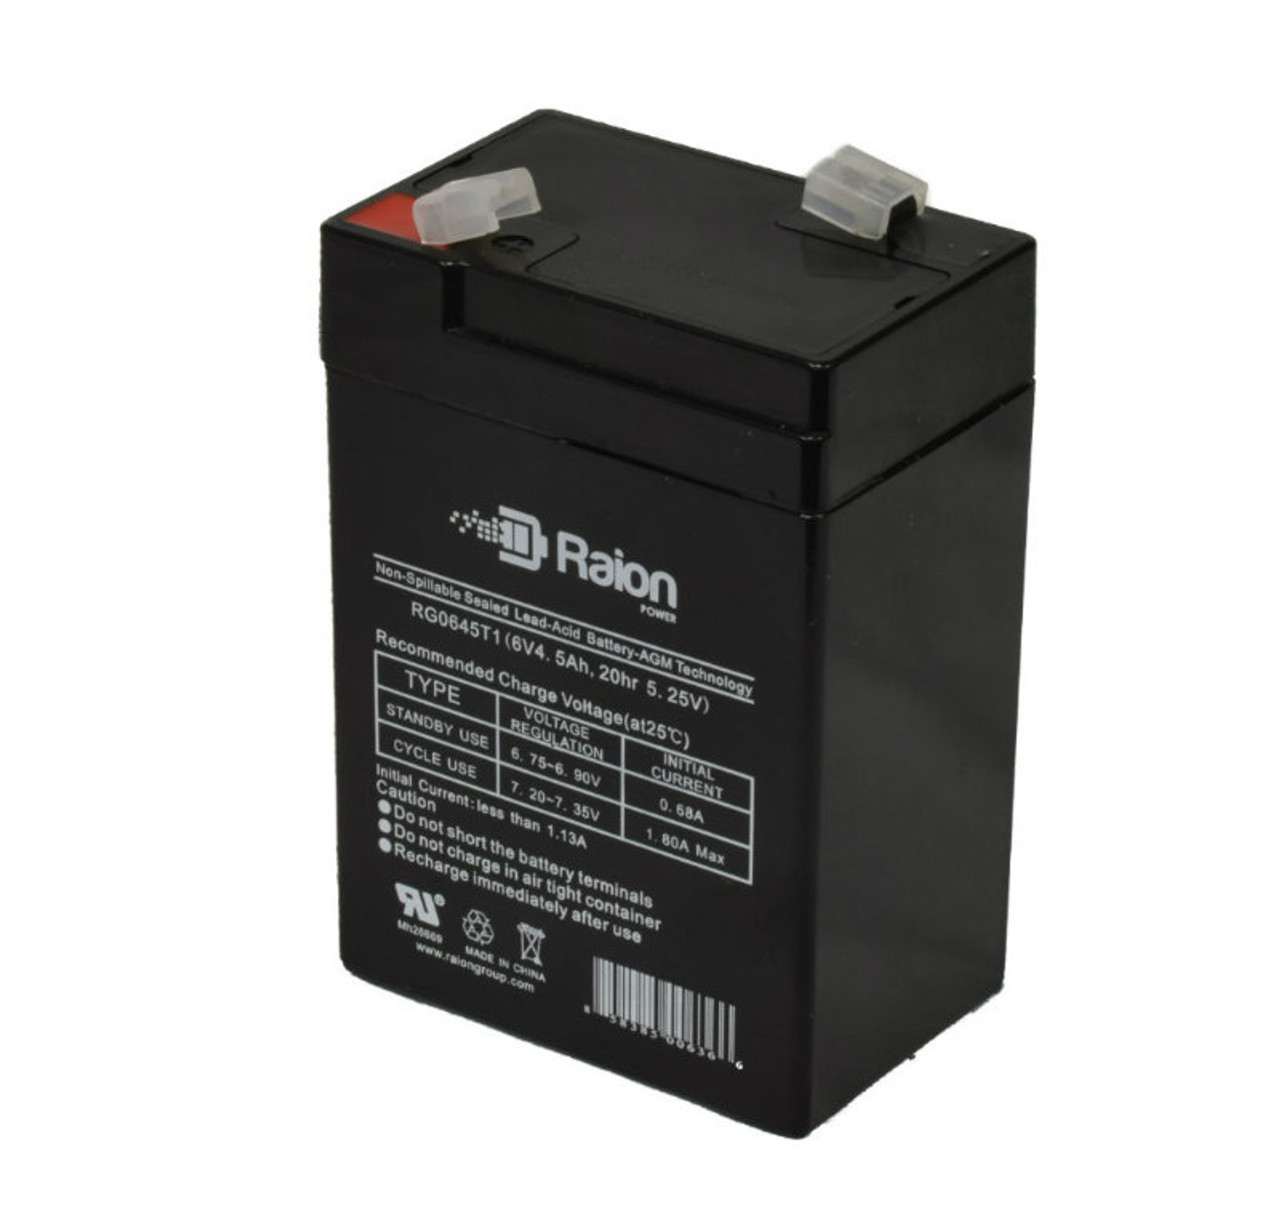 Raion Power RG0645T1 6V 4.5Ah Replacement Battery Cartridge for Criticare Systems 502 Pulse Oximeter